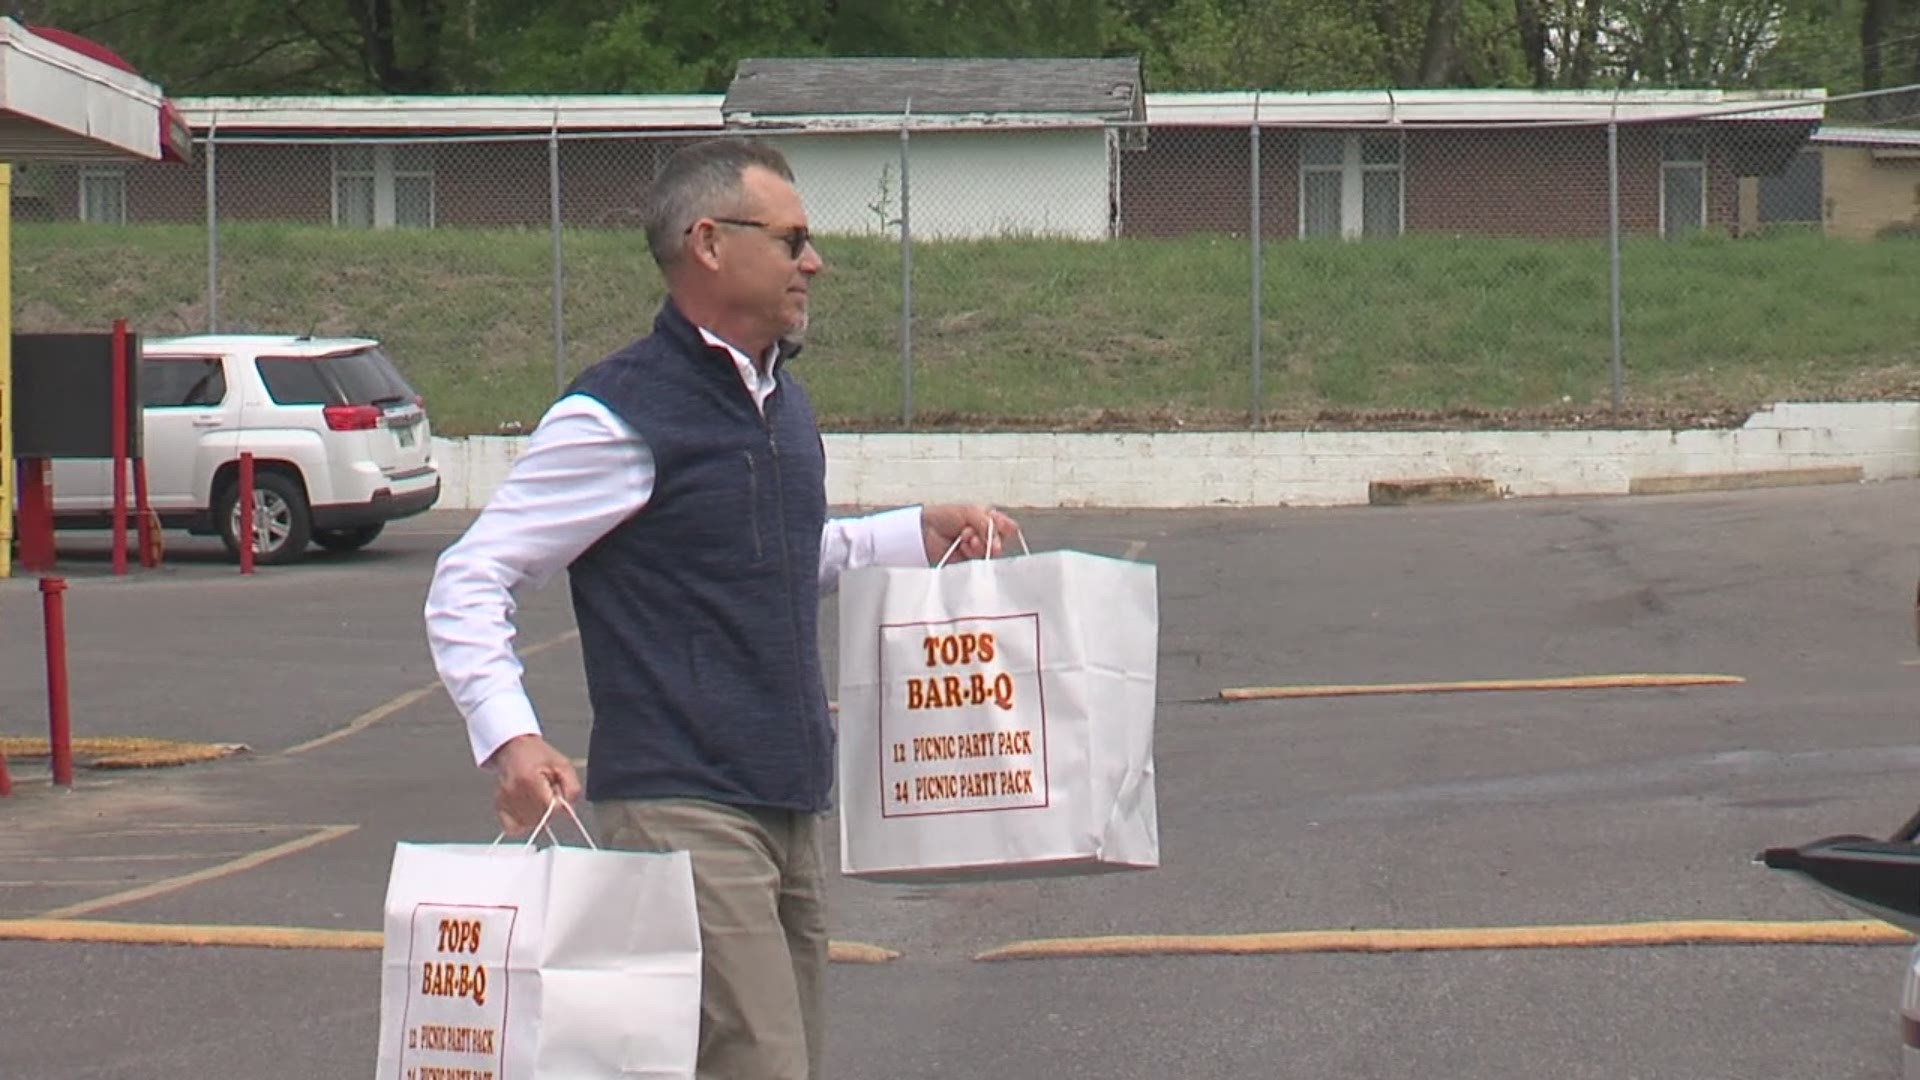 They are delivering lunches for workers at seven different Kroger stores this week.